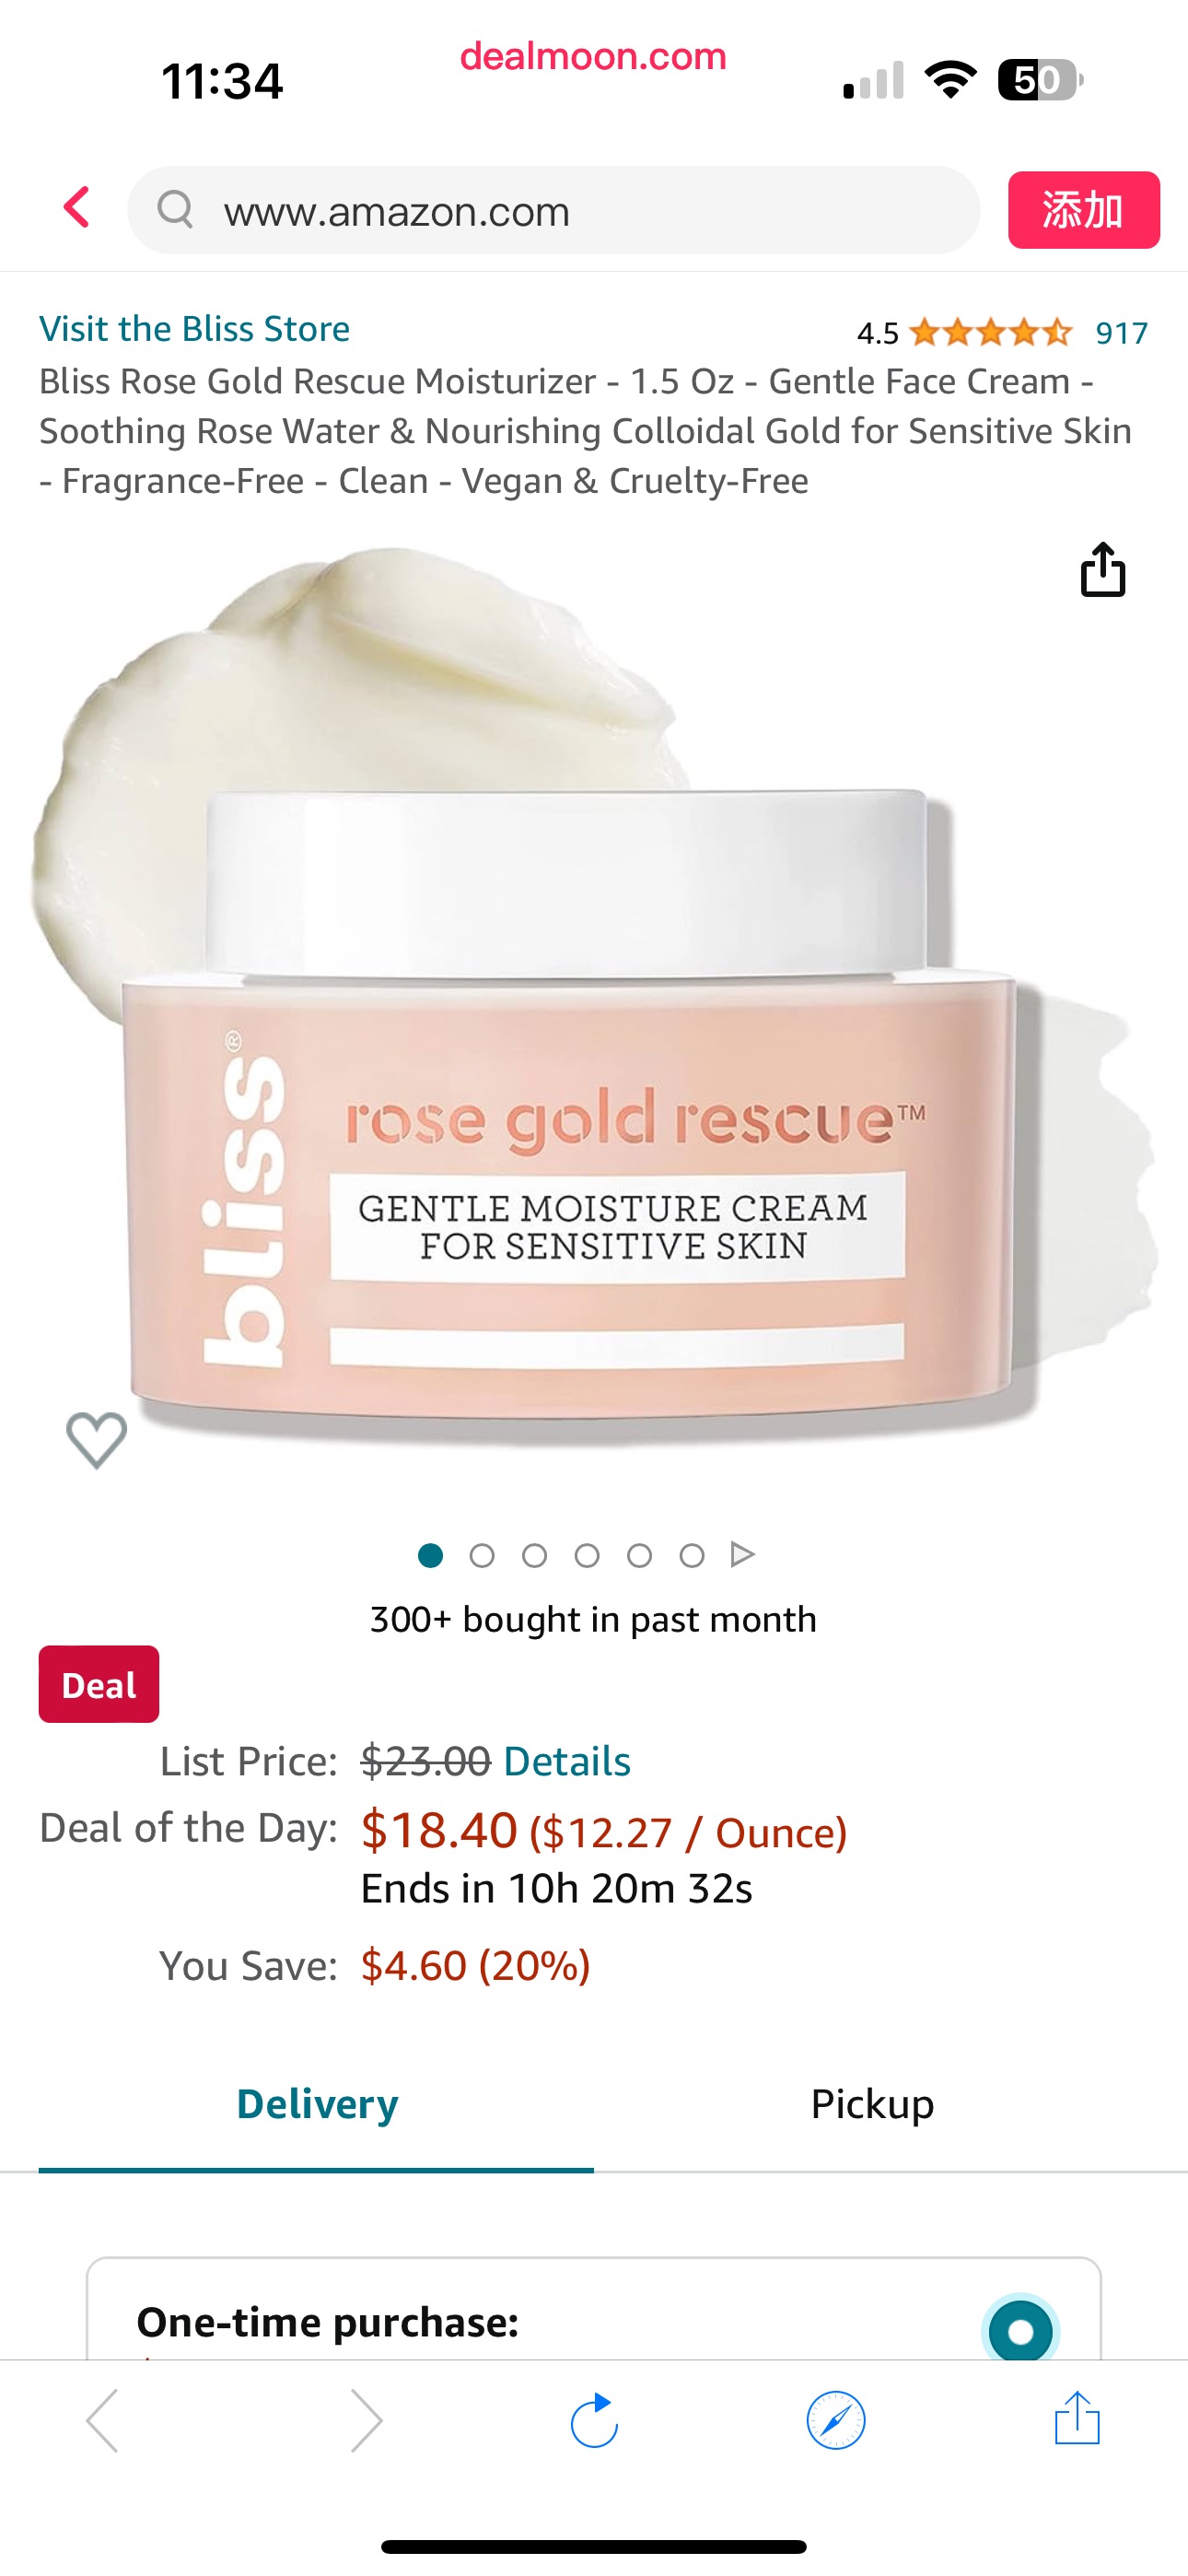 Amazon.com: Bliss Rose Gold Rescue Moisturizer - 1.5 Oz - Gentle Face Cream - Soothing Rose Water & Nourishing Colloidal Gold for Sensitive Skin - Fragrance-Free - Clean - Vegan & Cruelty-Free : Beaut